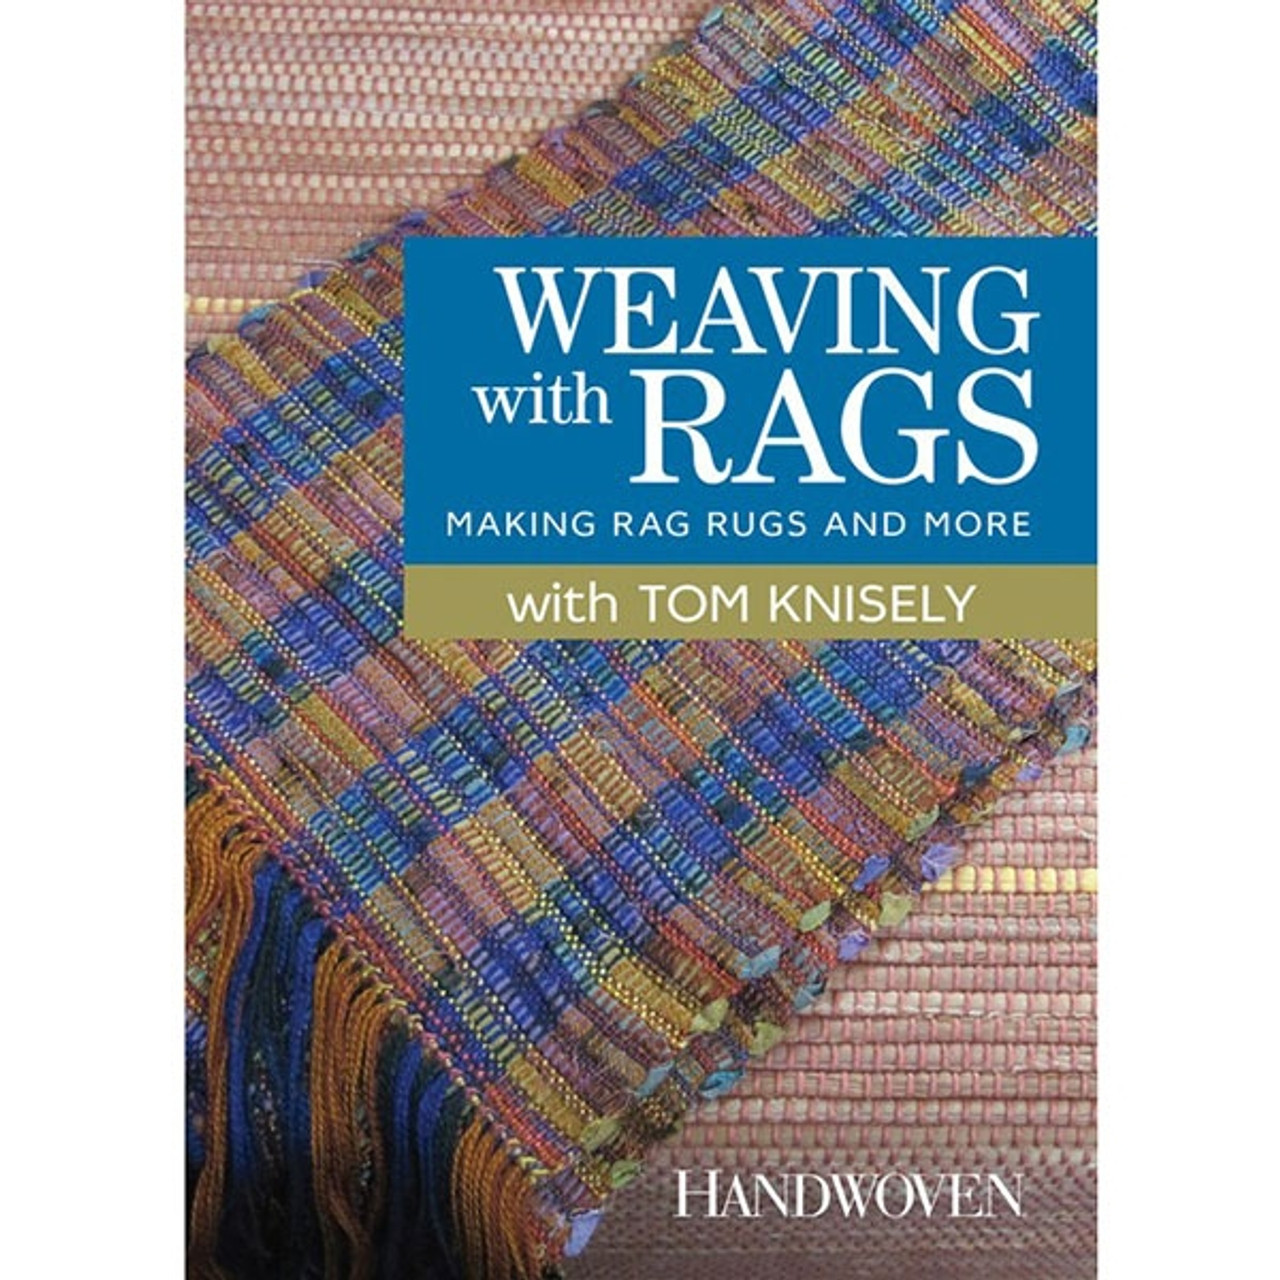 Weaving with Rags: Making Rag Rugs and More DVD